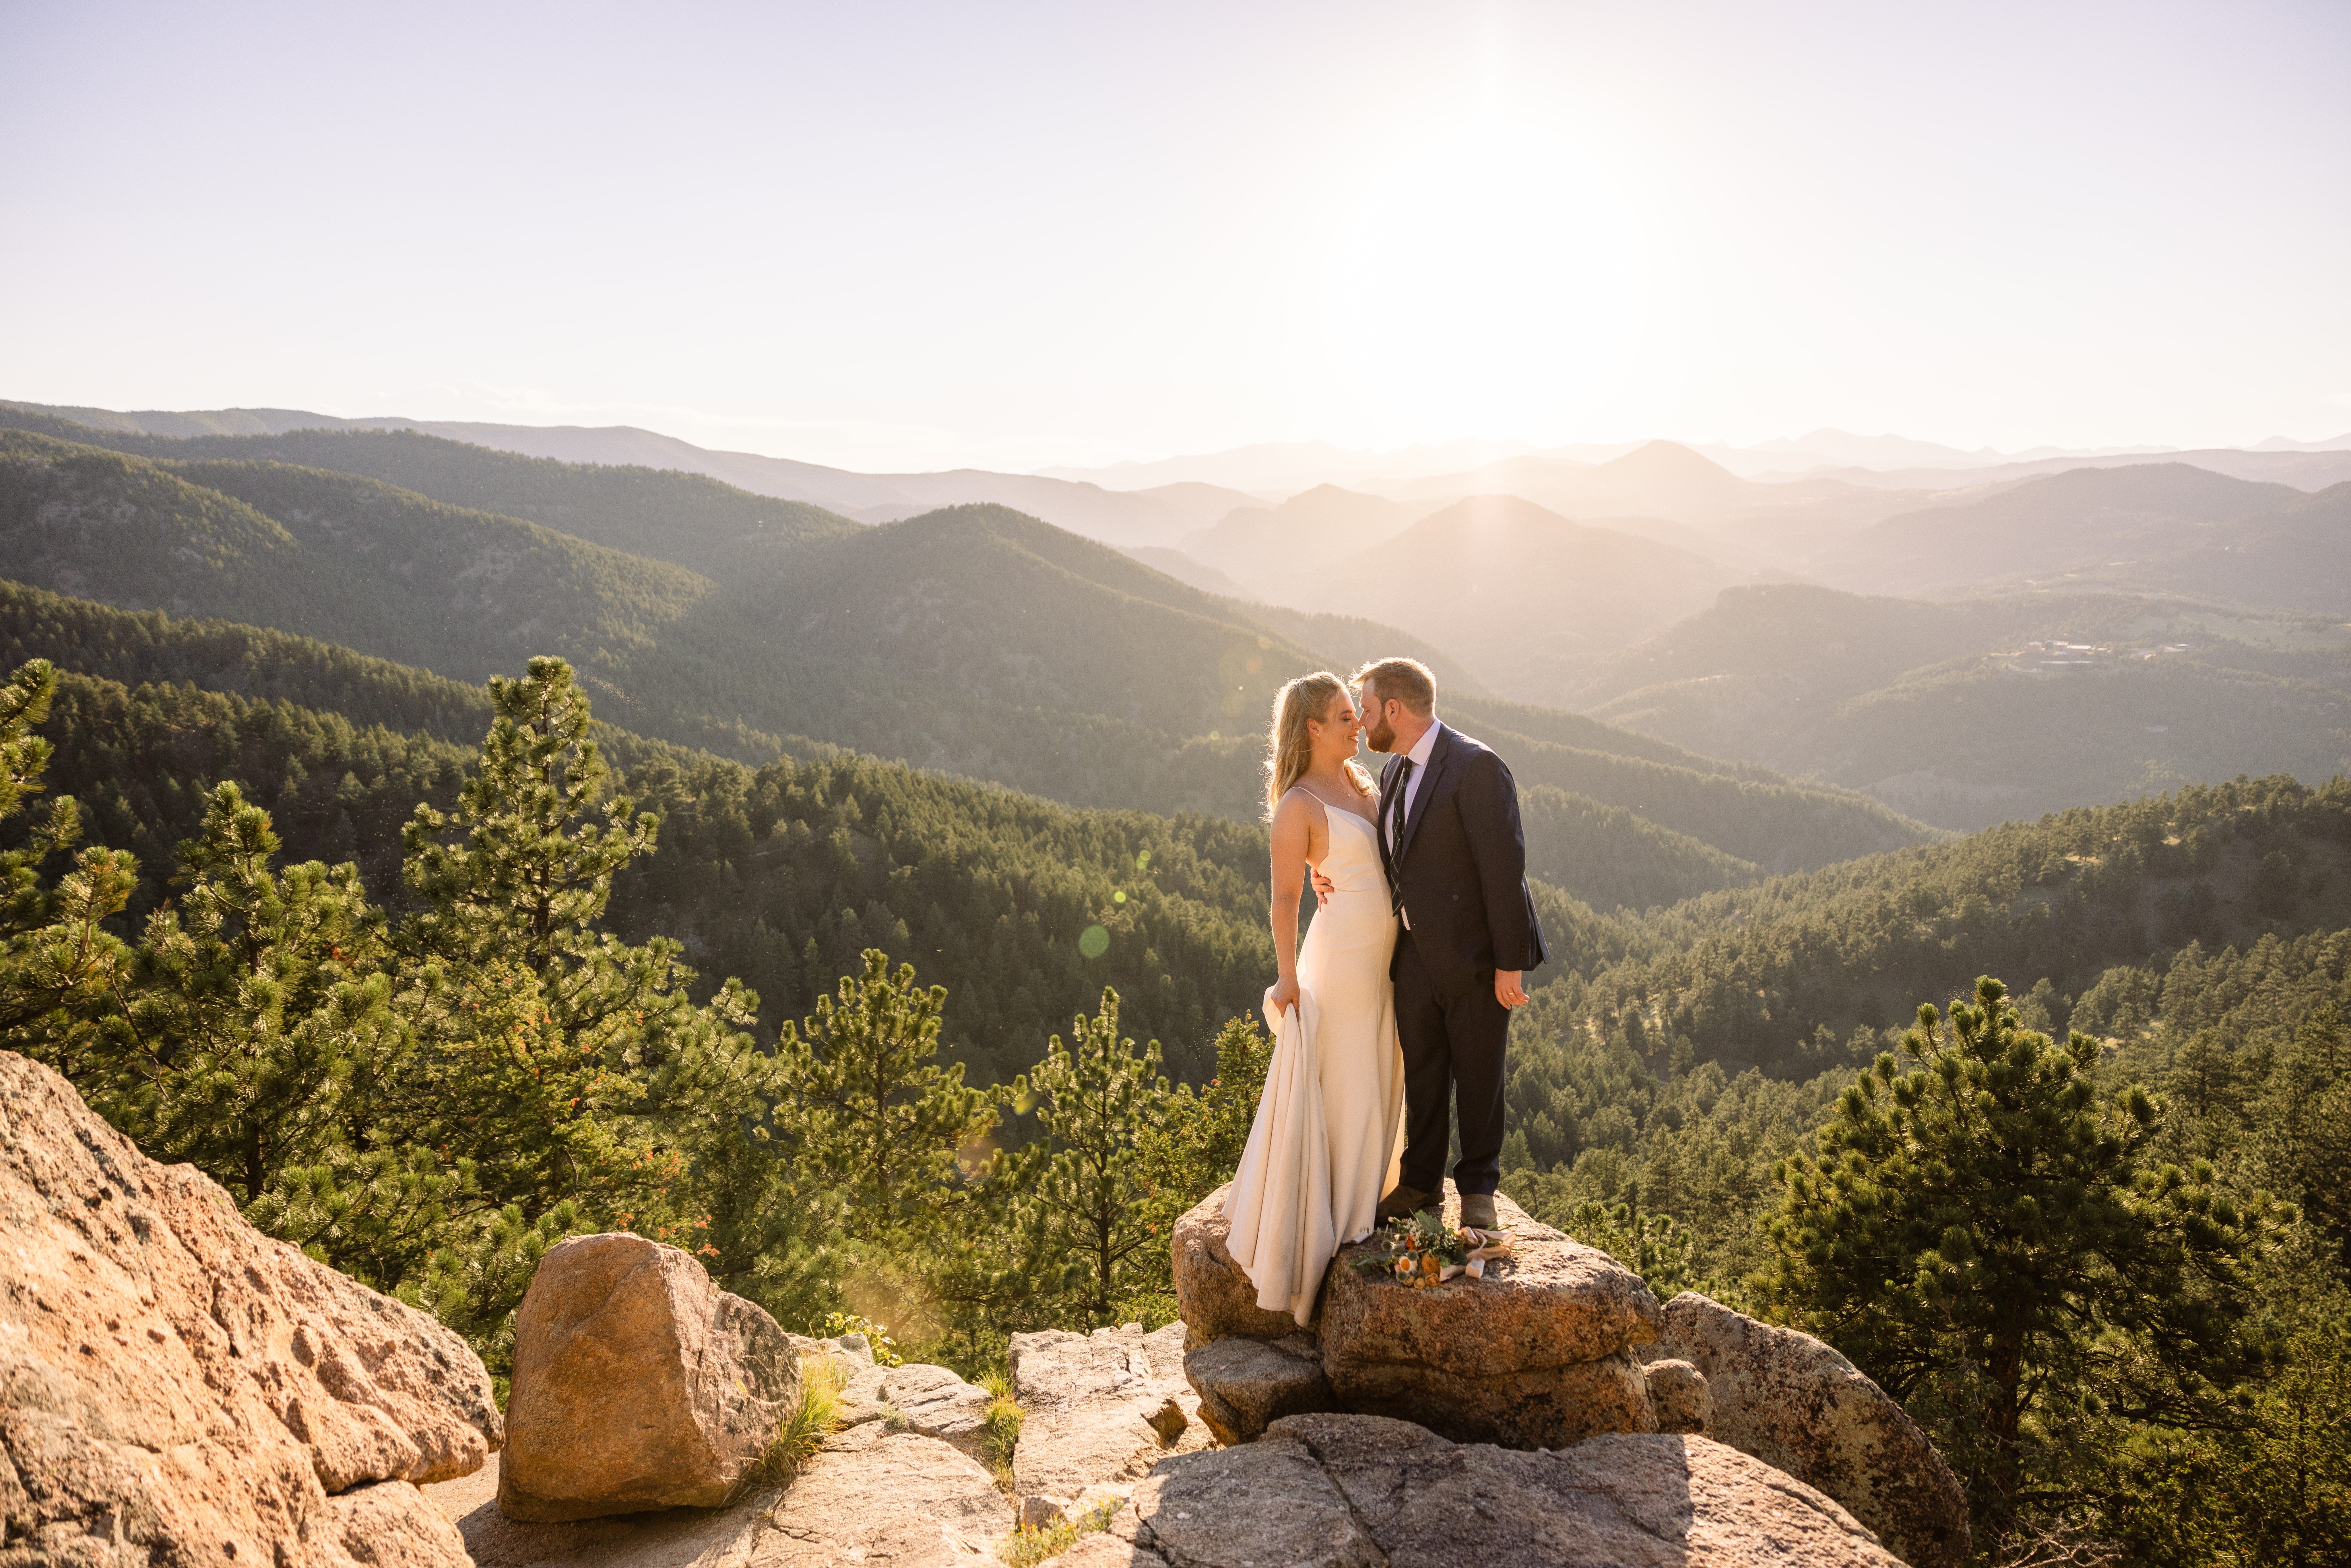 The bride and groom standing on a mountain stop nose to nose after their Sunrise Amphitheater wedding.